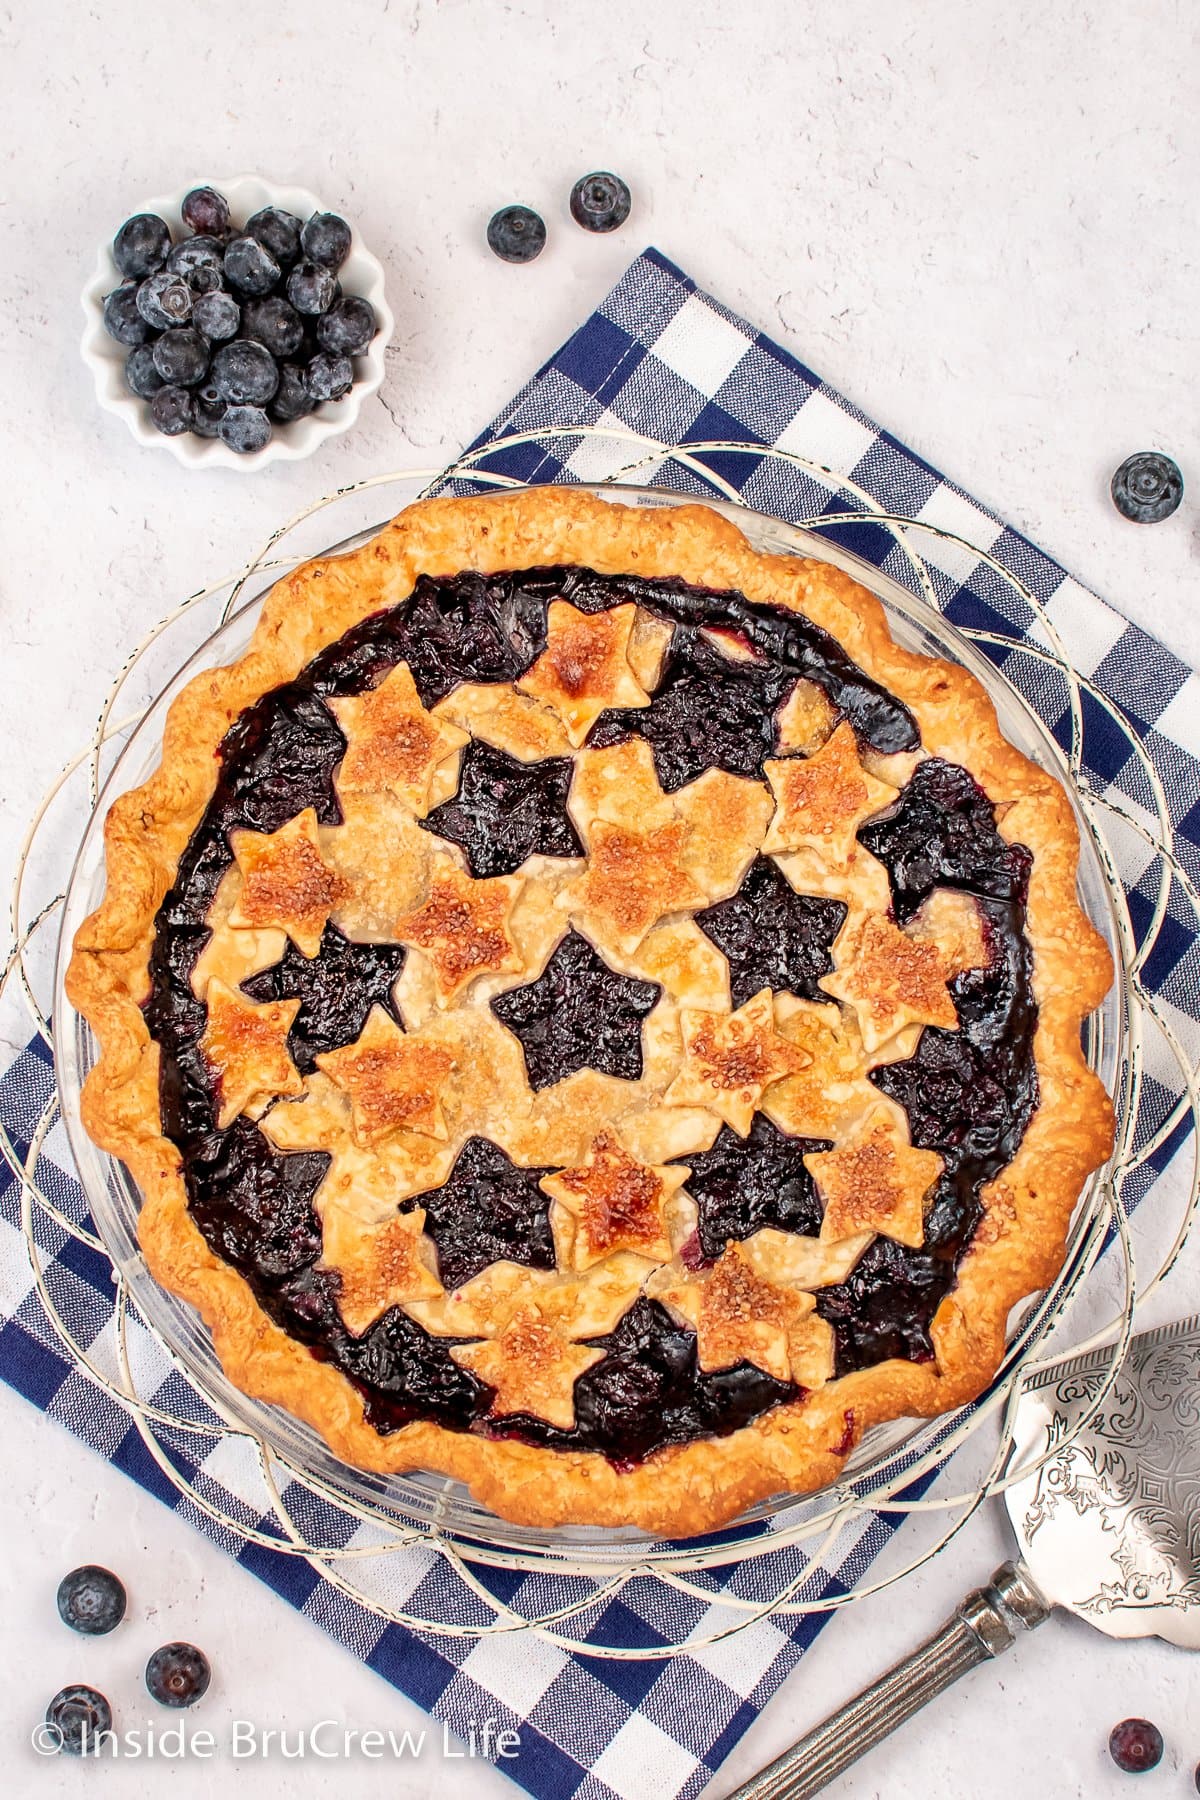 Overhead picture of a whole blueberry pie.